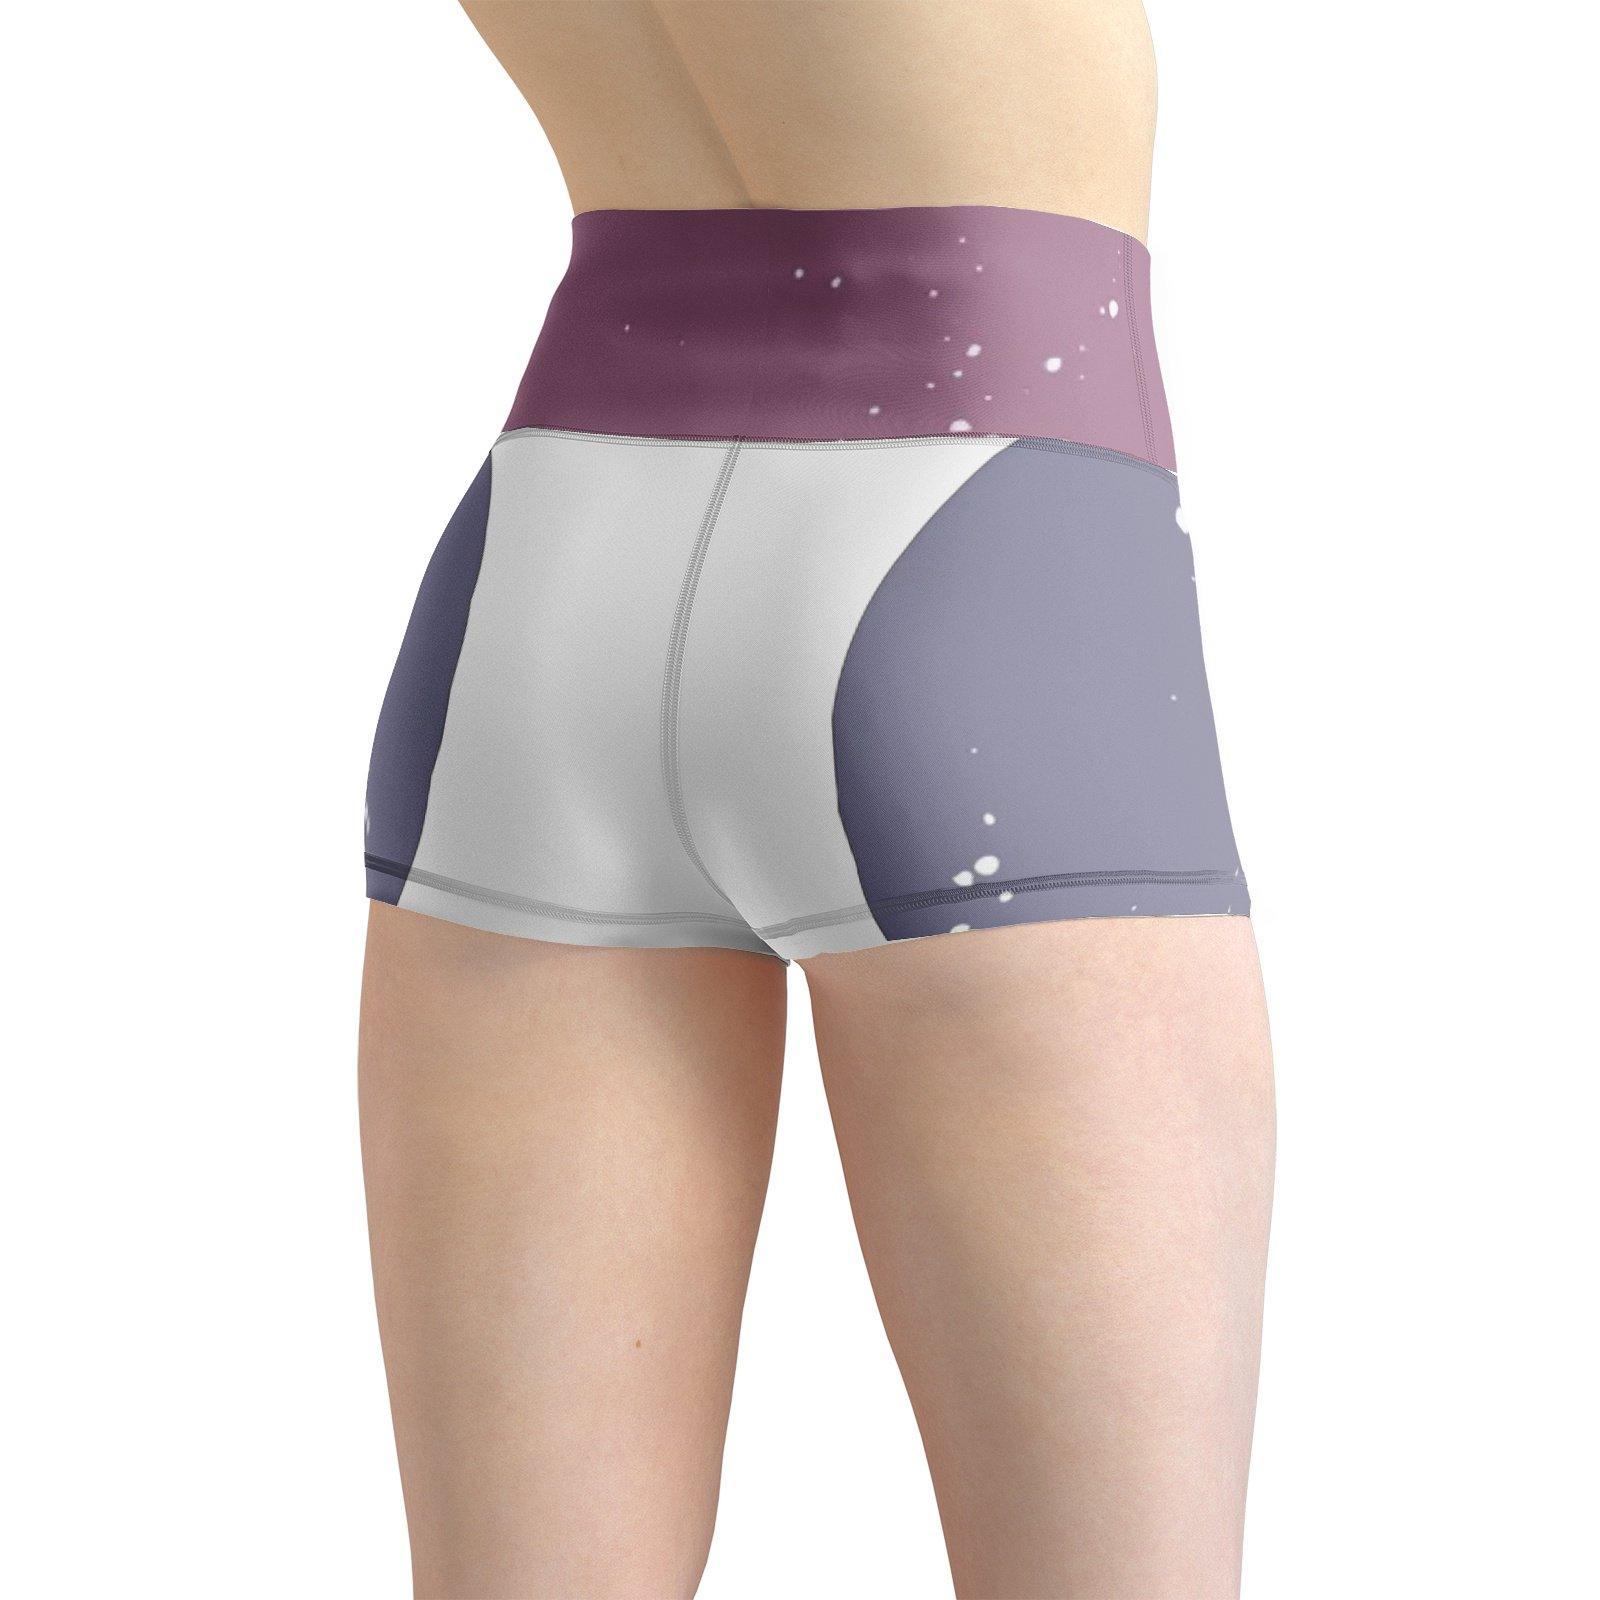 Women's Yoga Fashionable Shorts - Personal Hour for Yoga and Meditations 